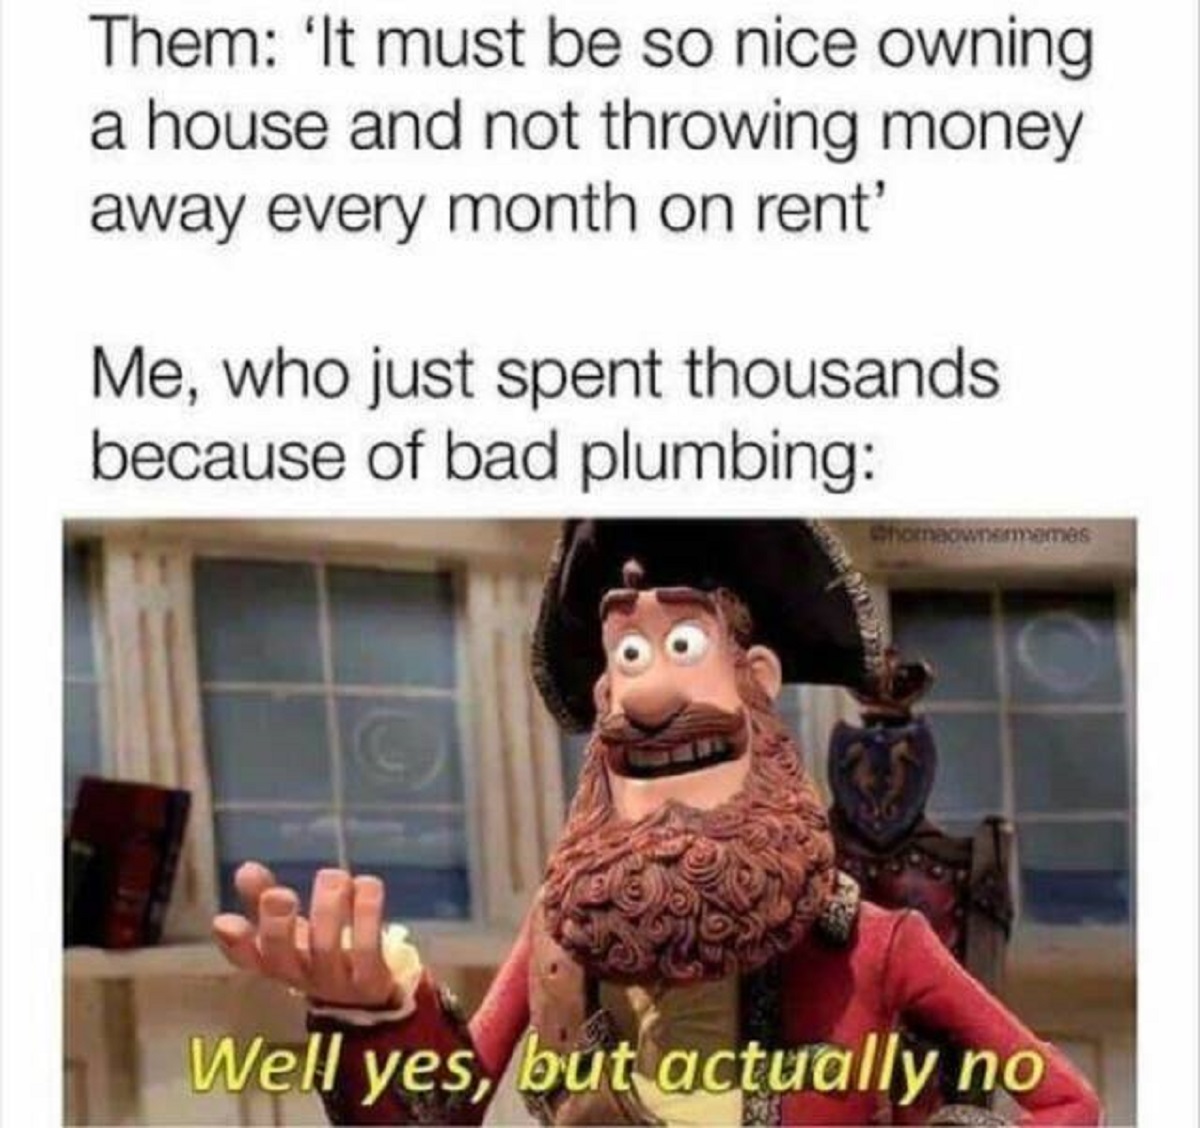 well no but actually yes - Them 'It must be so nice owning a house and not throwing money away every month on rent' Me, who just spent thousands because of bad plumbing Chomeownermemes Well yes, but actually no